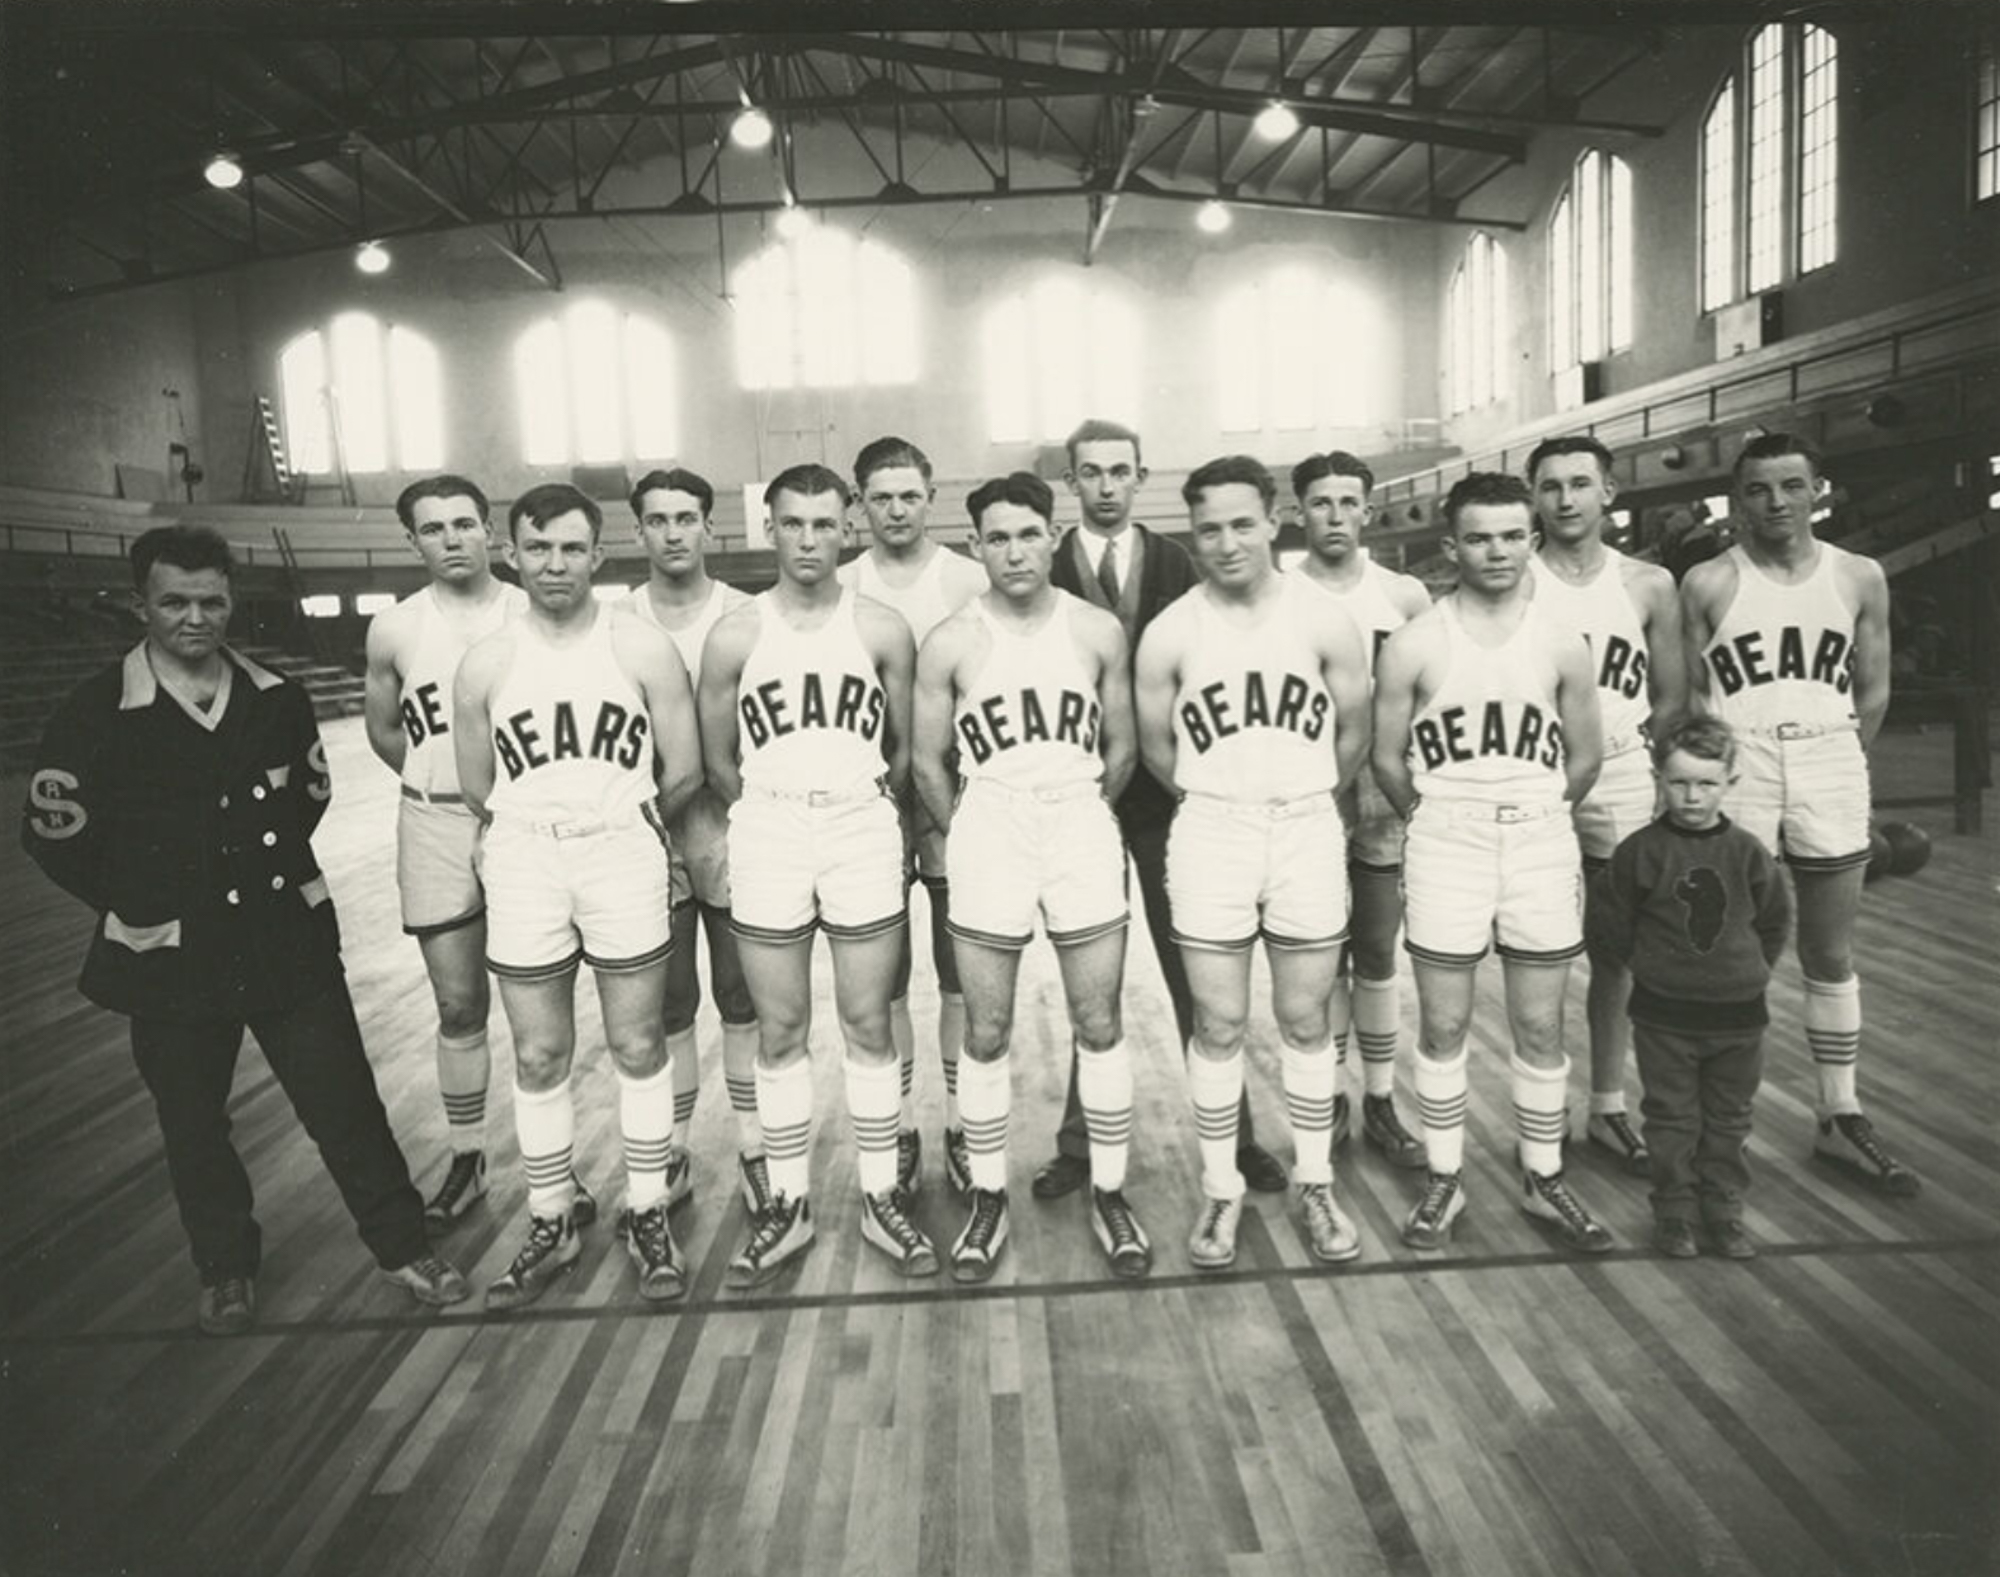 Dauth Family Archive - 1927 - High Plains Library District - Colorado Teachers College Basketball Team Gym Photo